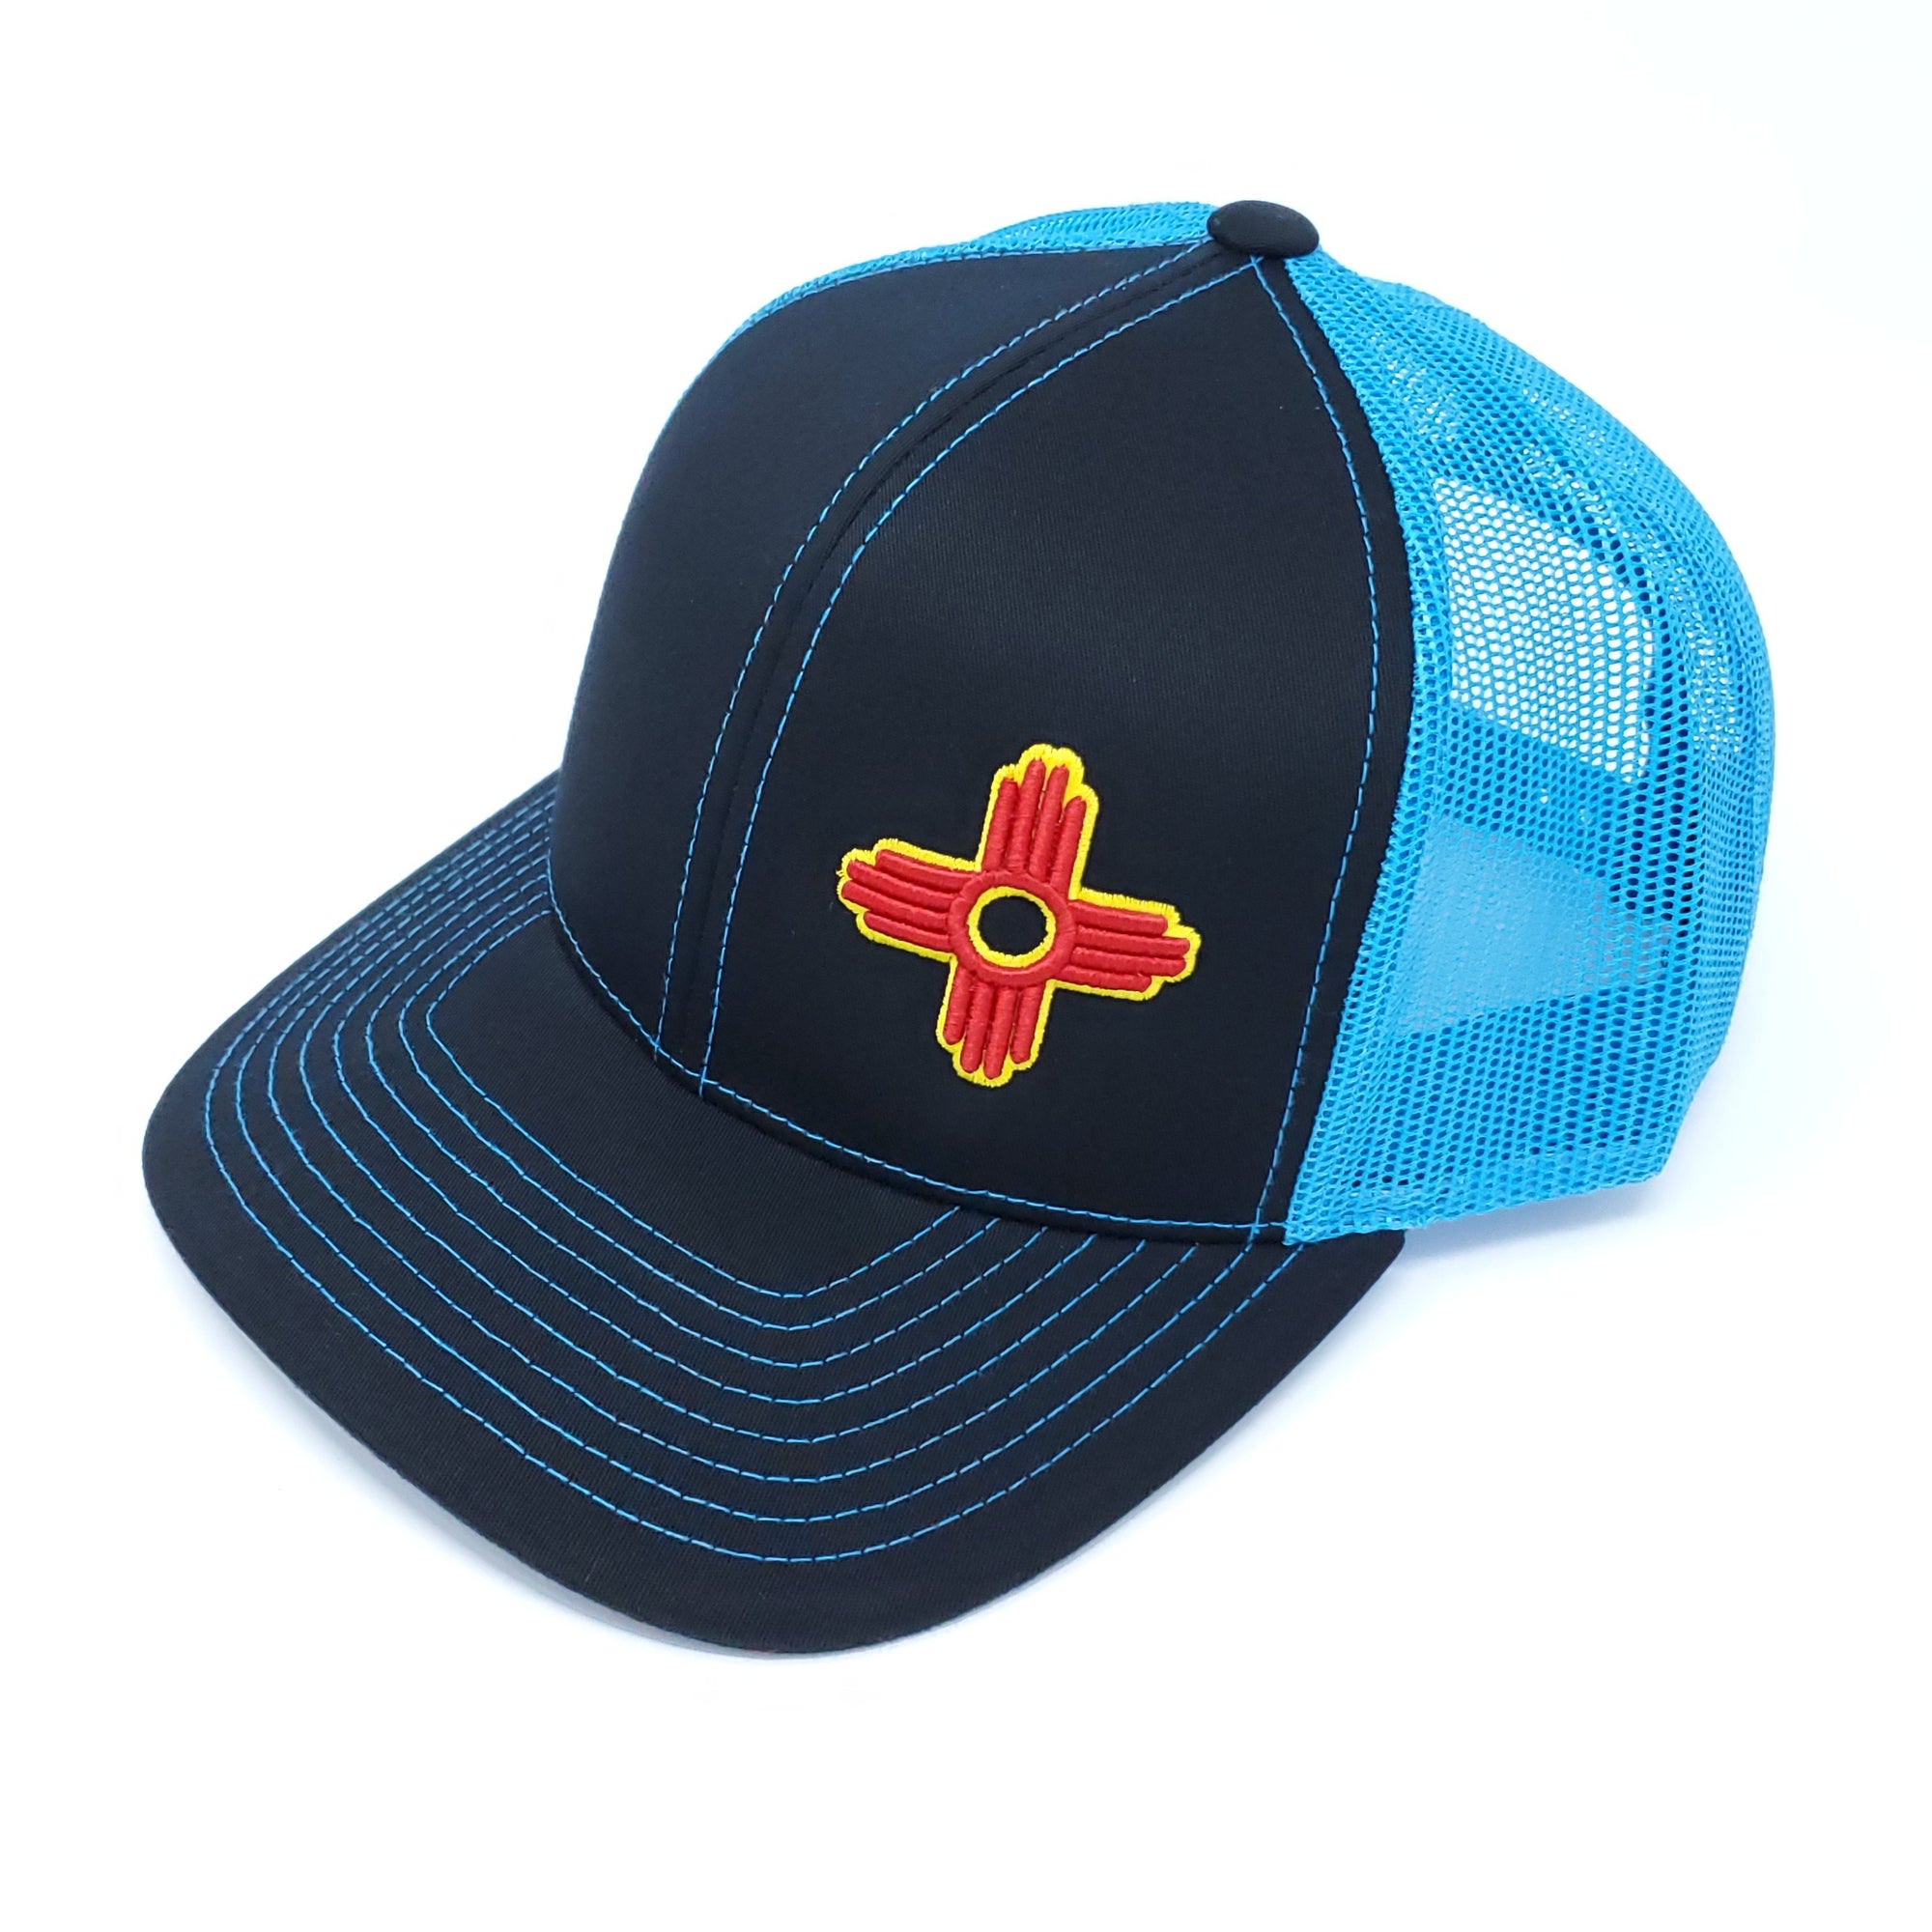 Neon Blue and Black Trucker Style Snapback with Embroidered Zia Symbol - Ragged Apparel Screen Printing and Signs - www.nmshirts.com